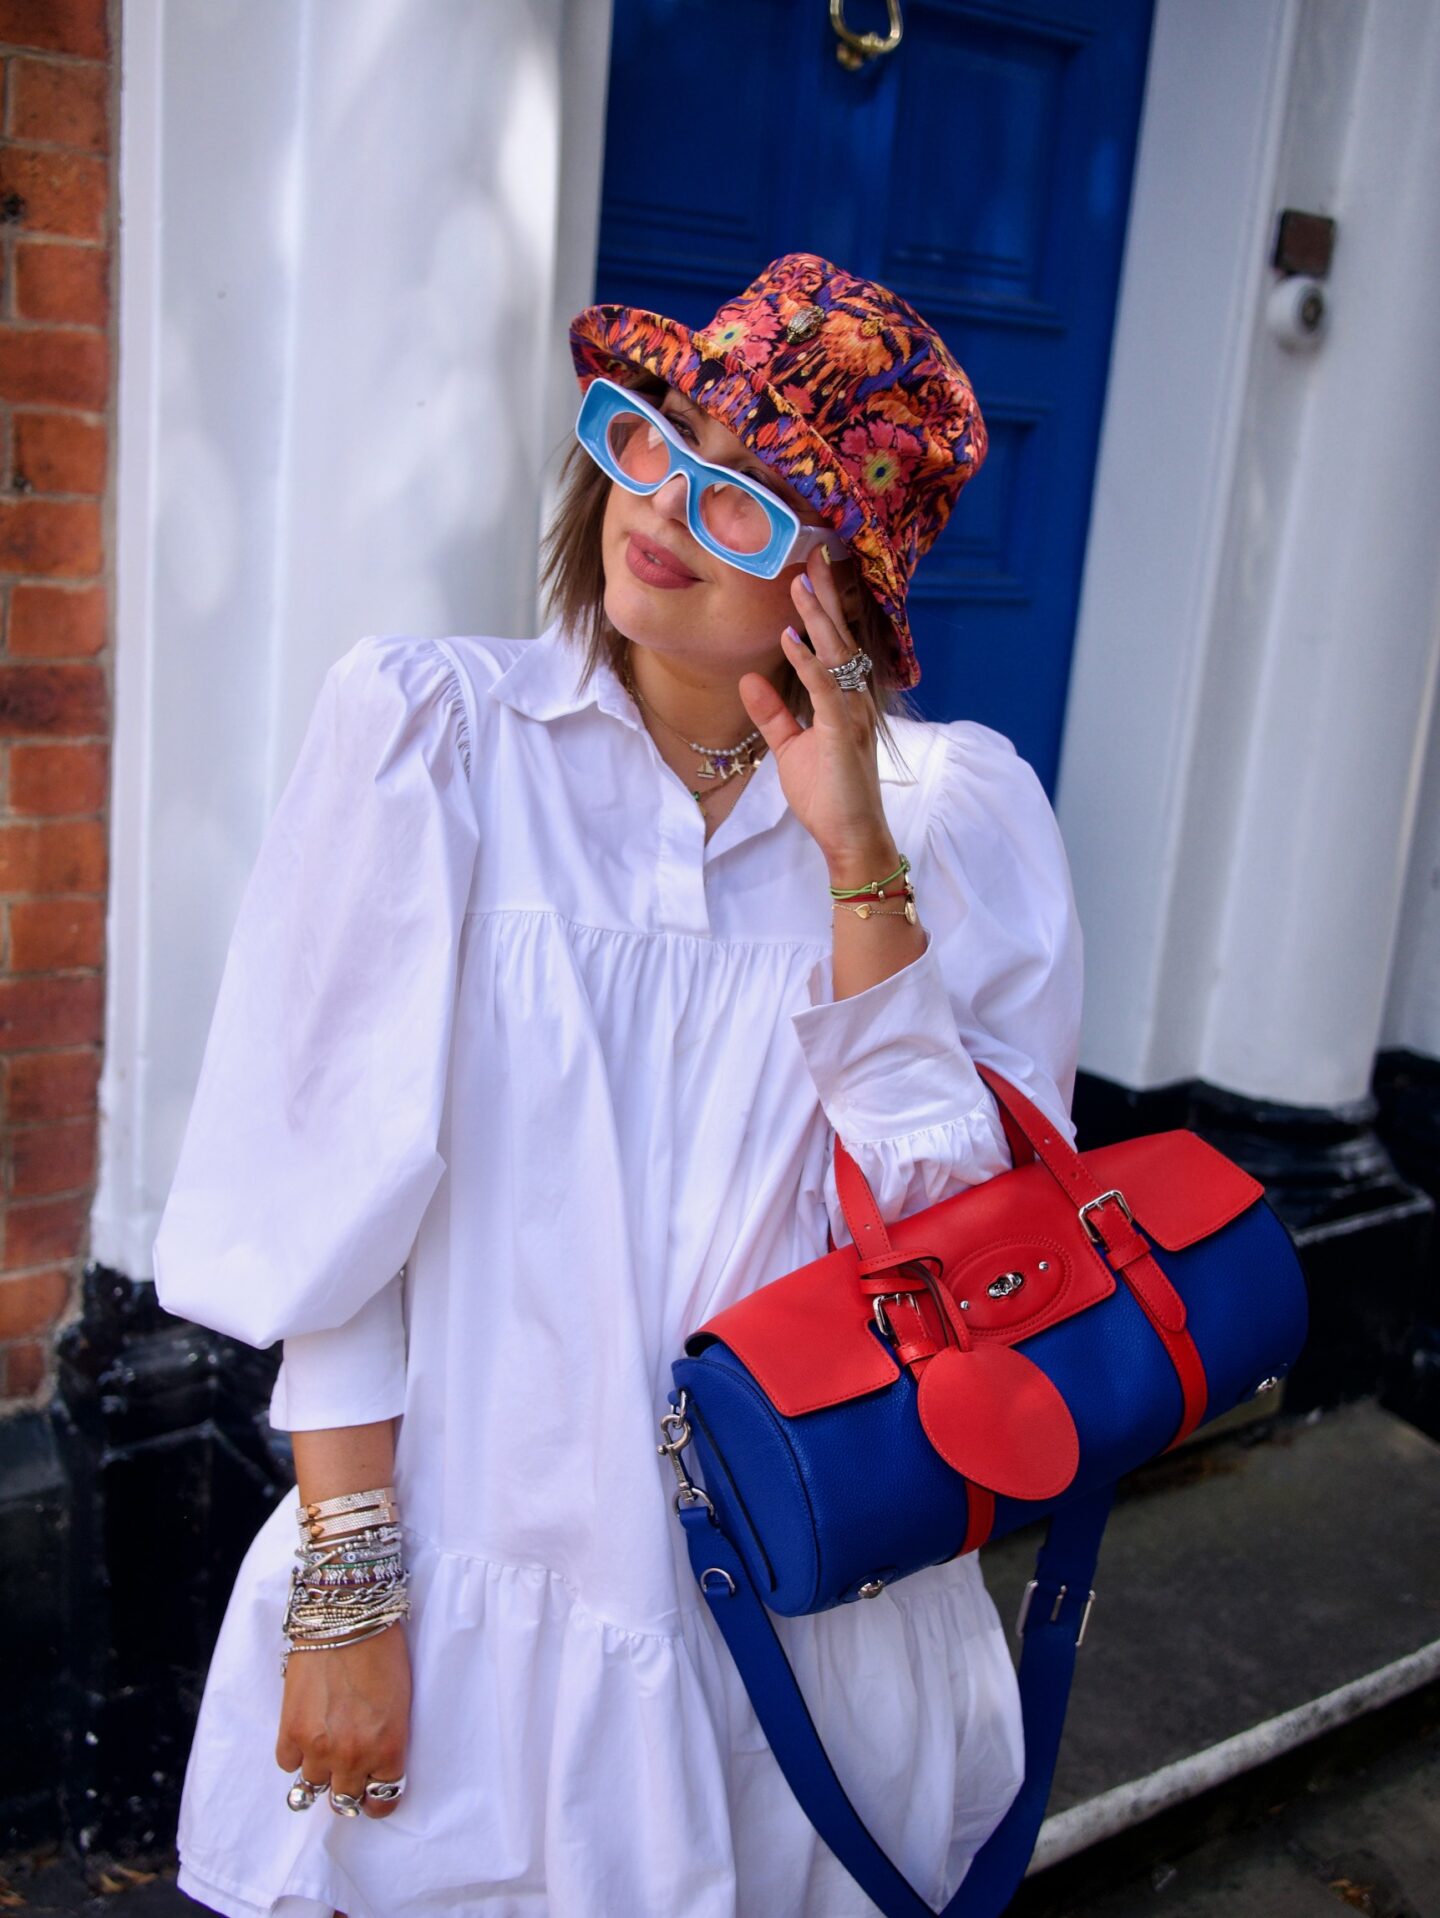 manchester fashion influencer,Influencer,fashion summer outfits. summer dresses, summer accessories,oootd, ret ready 